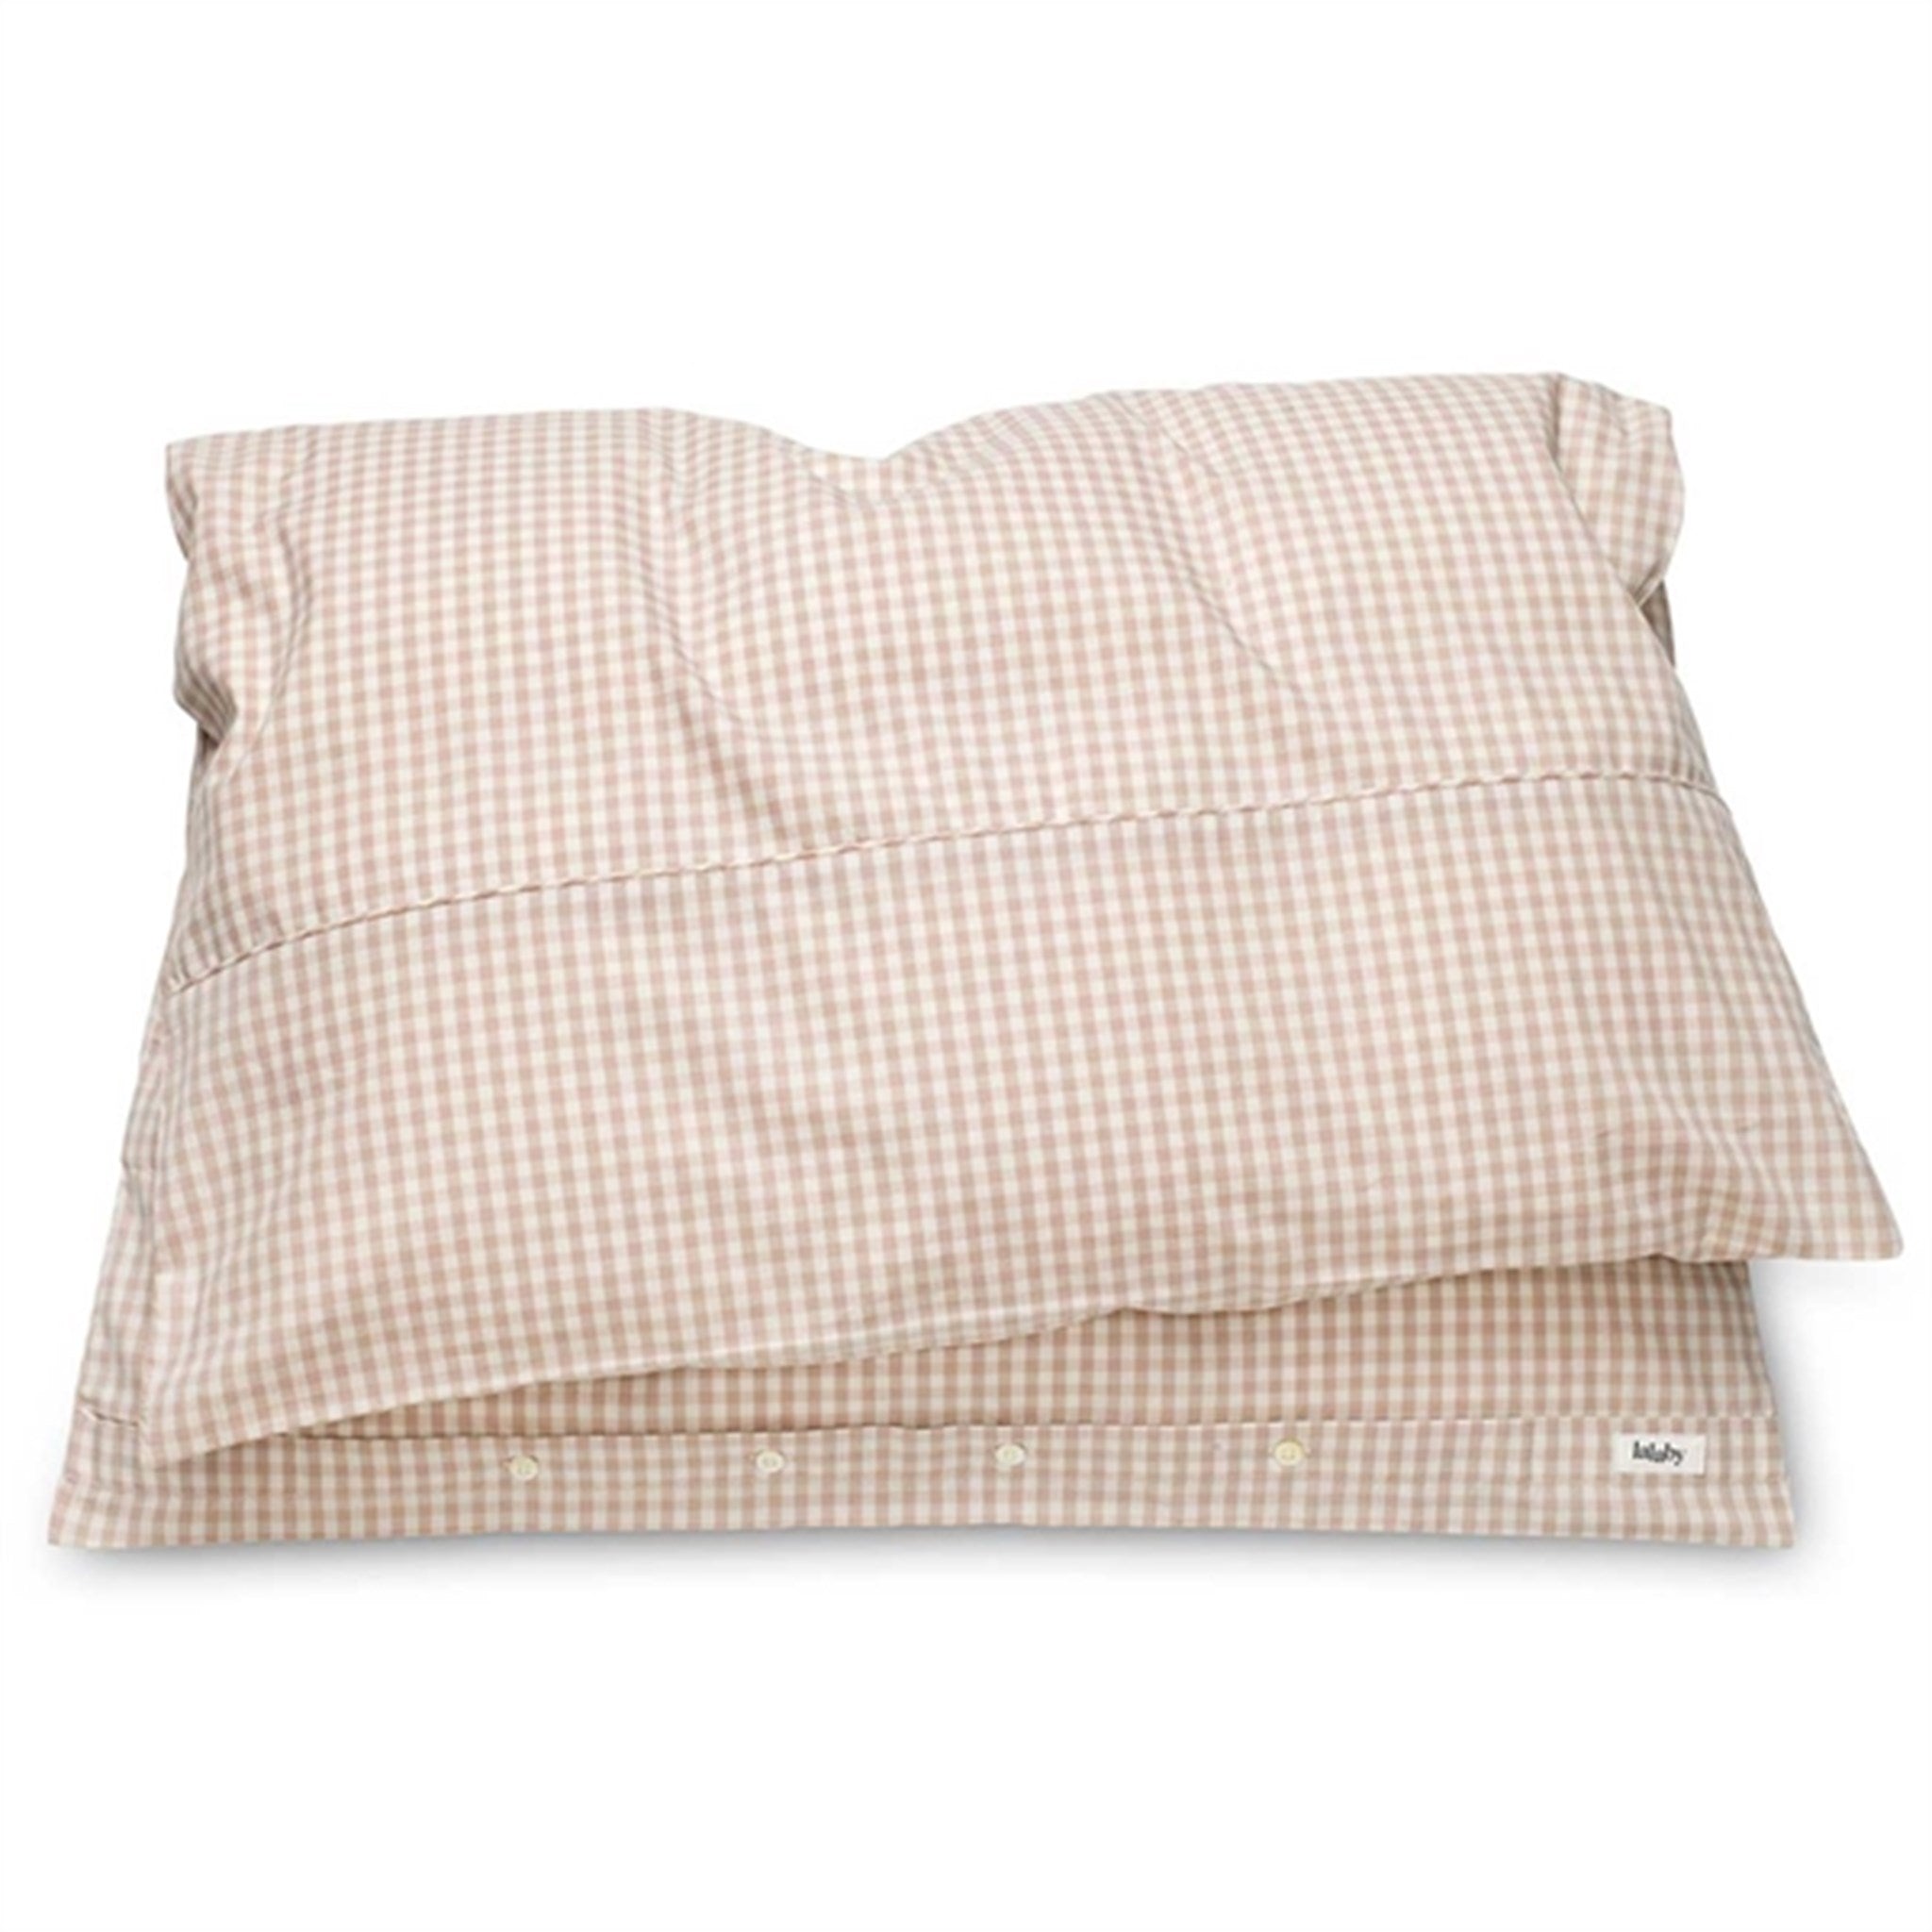 lalaby Beige Gingham Classic Bedding 2